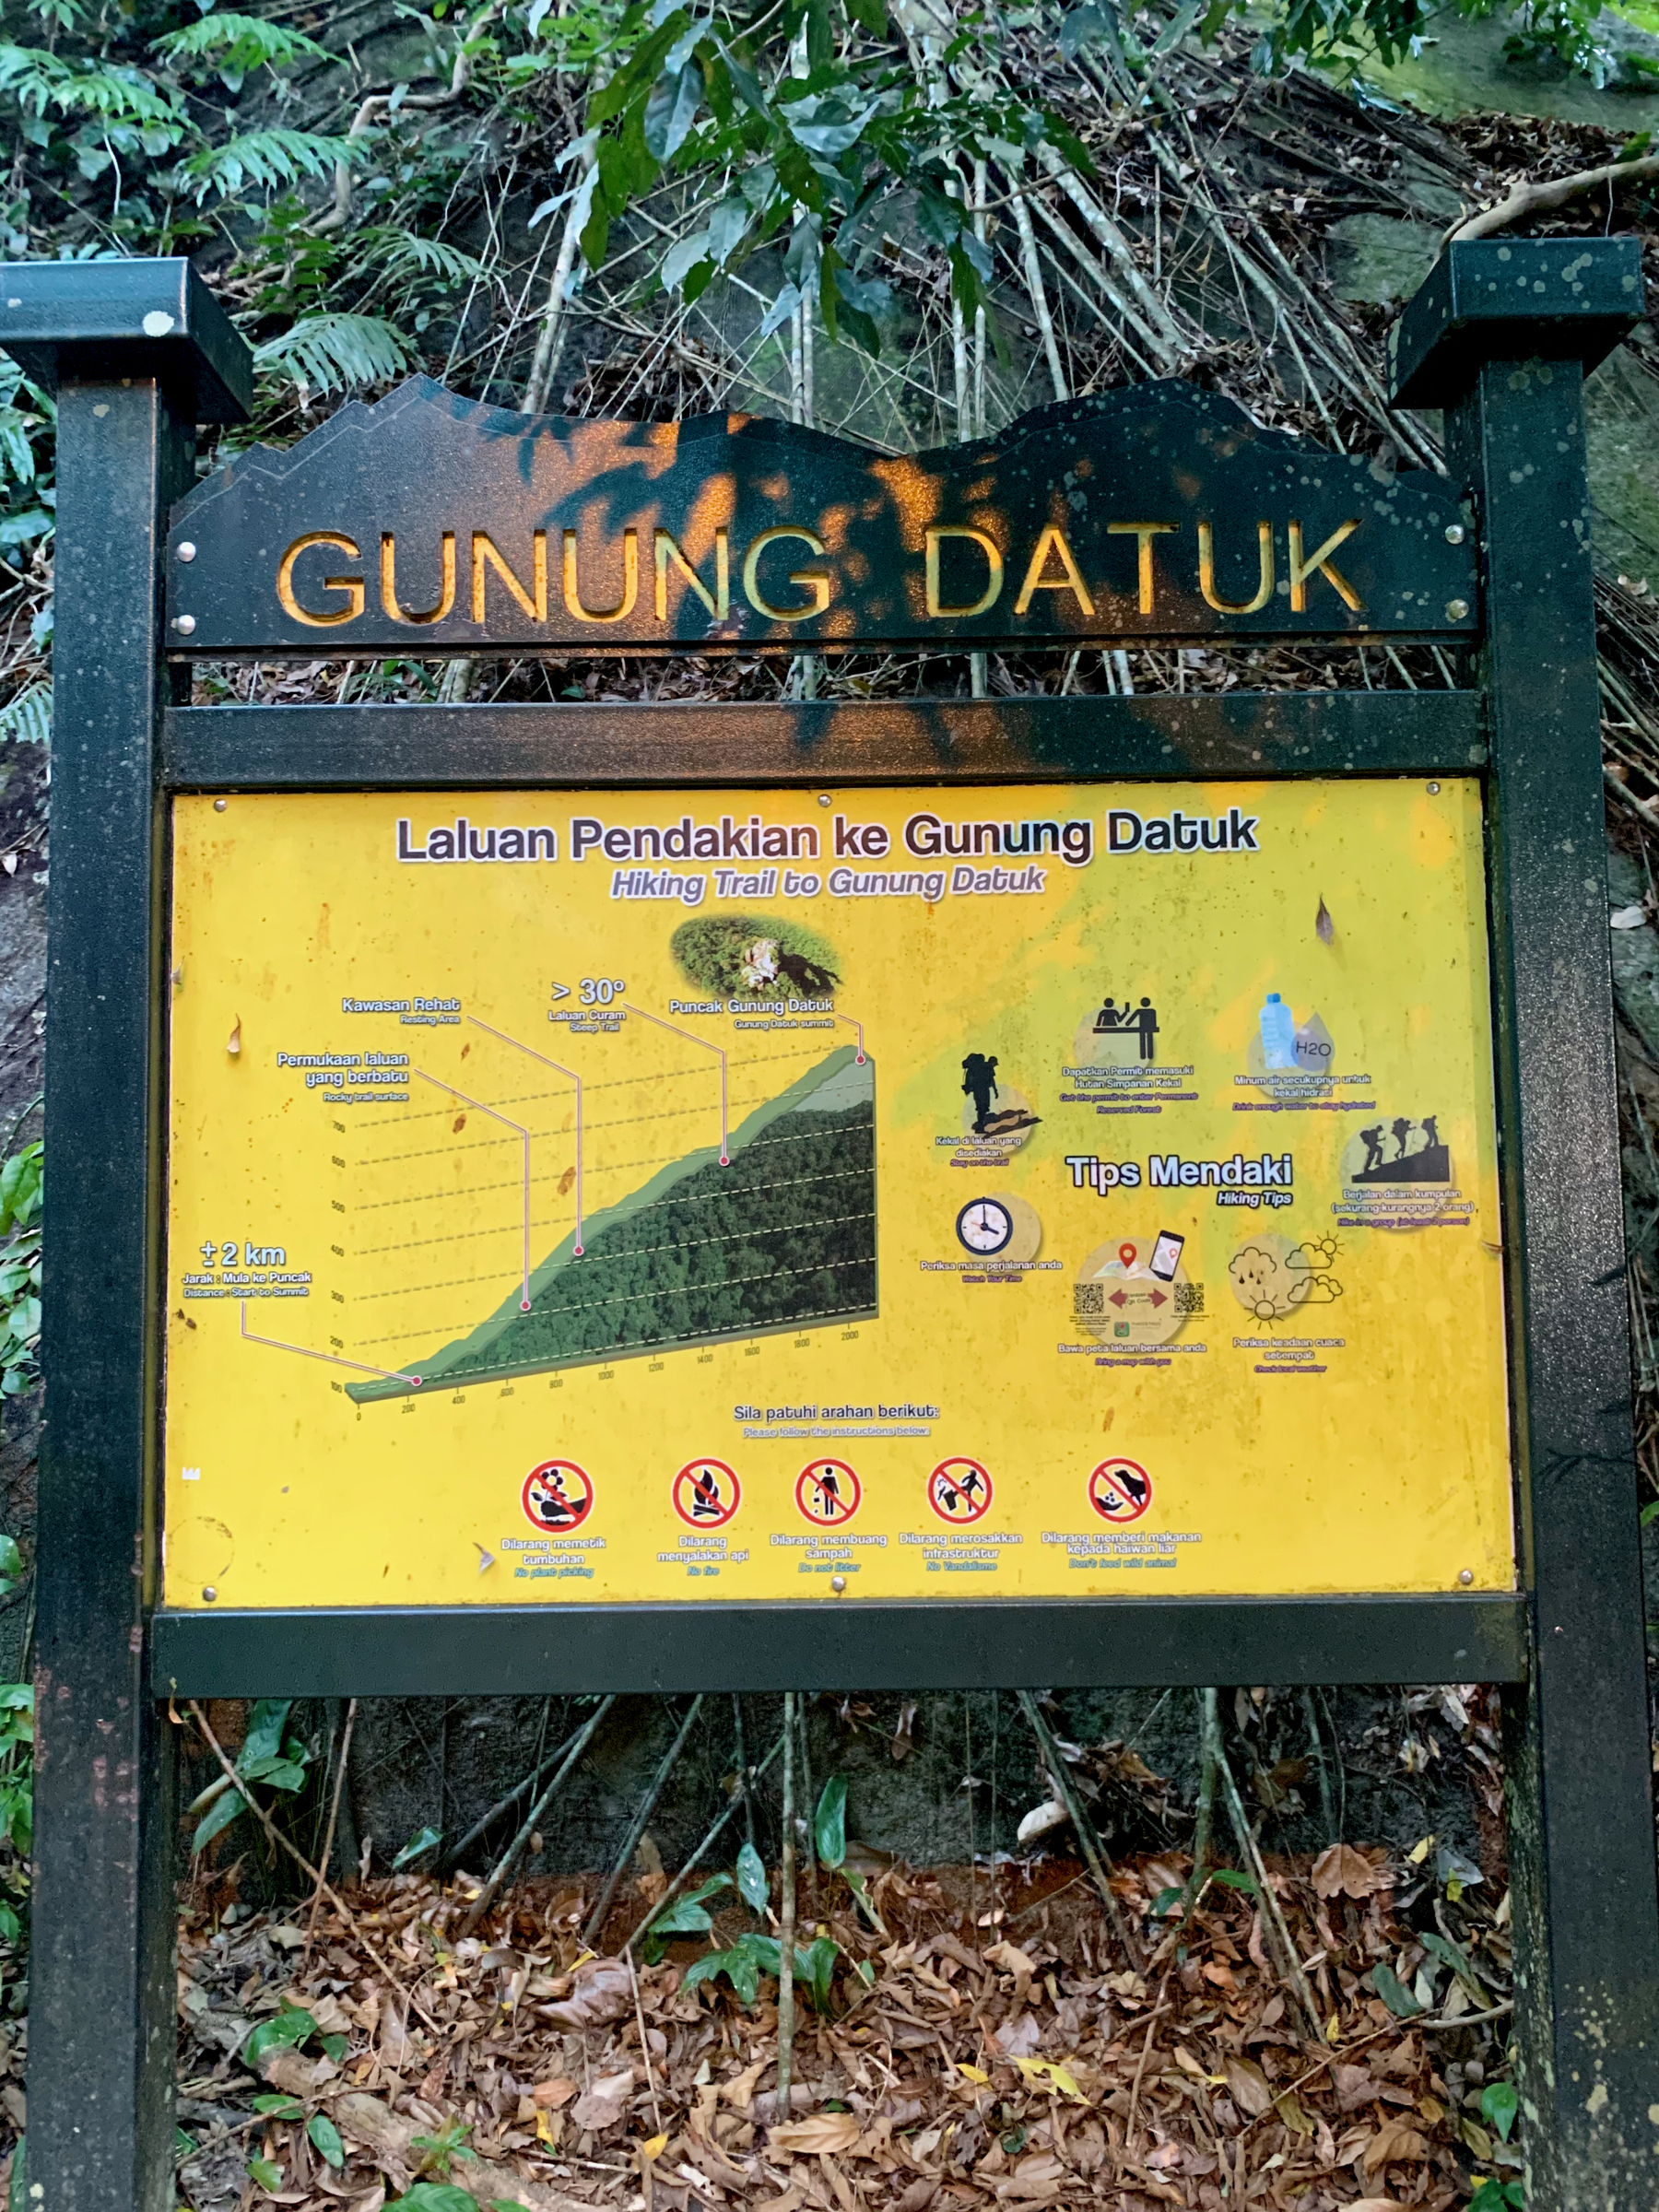 A board at the trailhead of Gunung Datuk that provides an overview of the trail